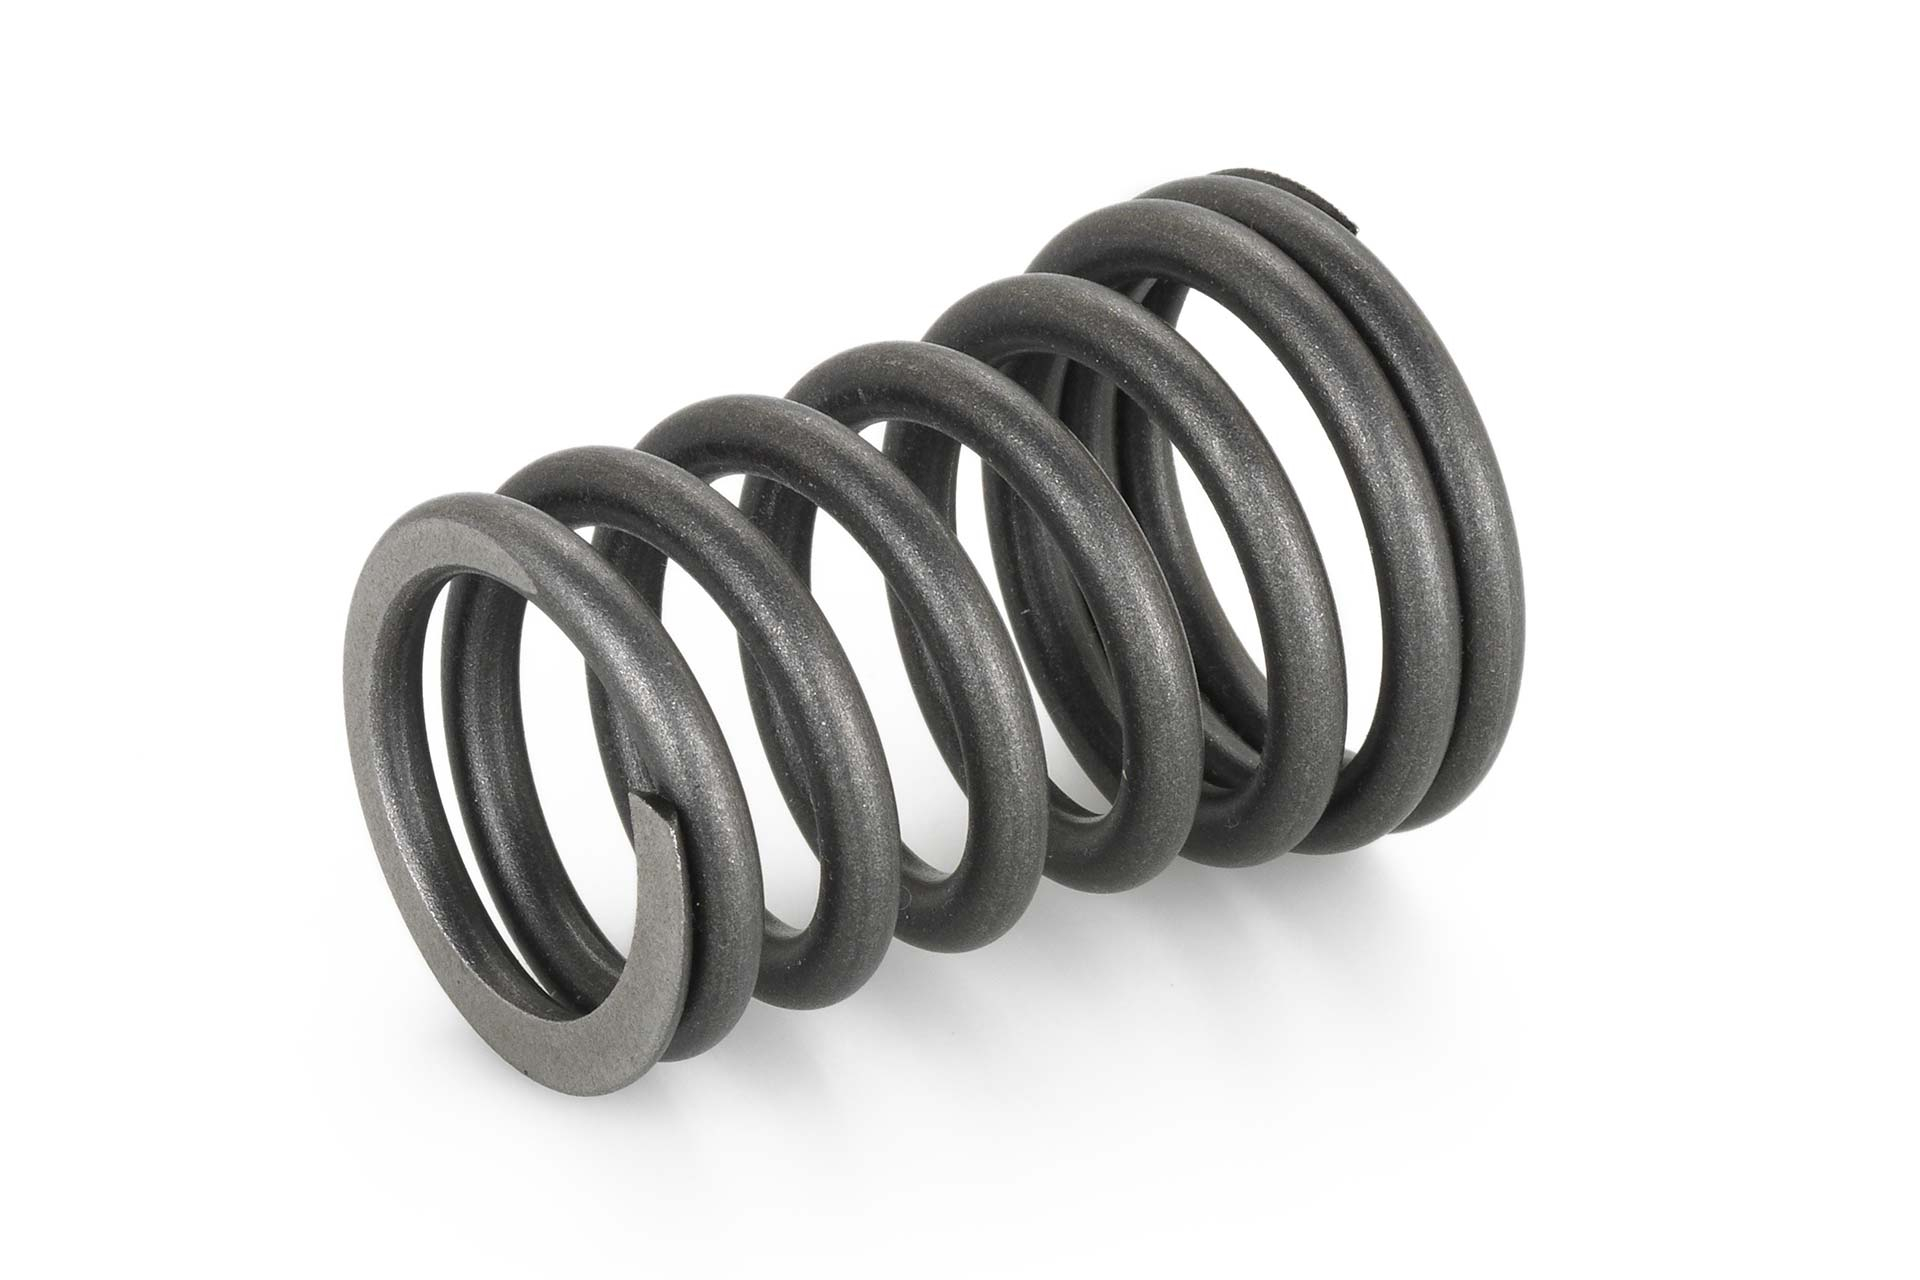 Rounded wire compression springs